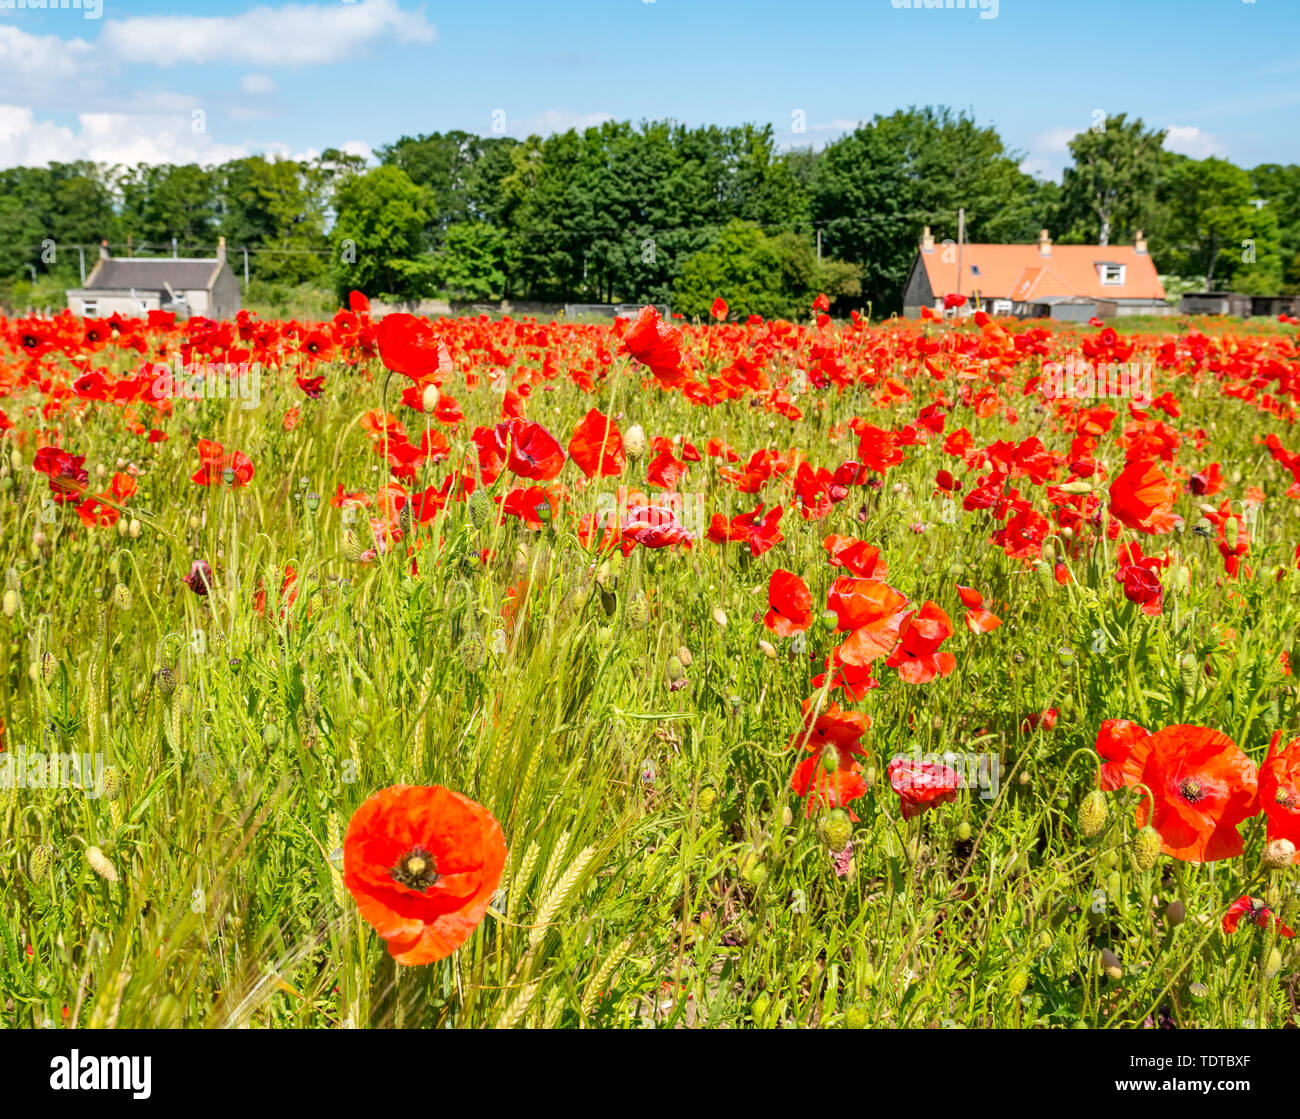 East Lothian, Scotland, United Kingdom, 19th June 2019. UK Weather: The recent wet and sunny weather has been just right for encouraging the growth of poppies which have flowered abundantly across the county. Red poppies, common poppy, Flanders poppy, field poppy or corn rose poppies in a field Stock Photo